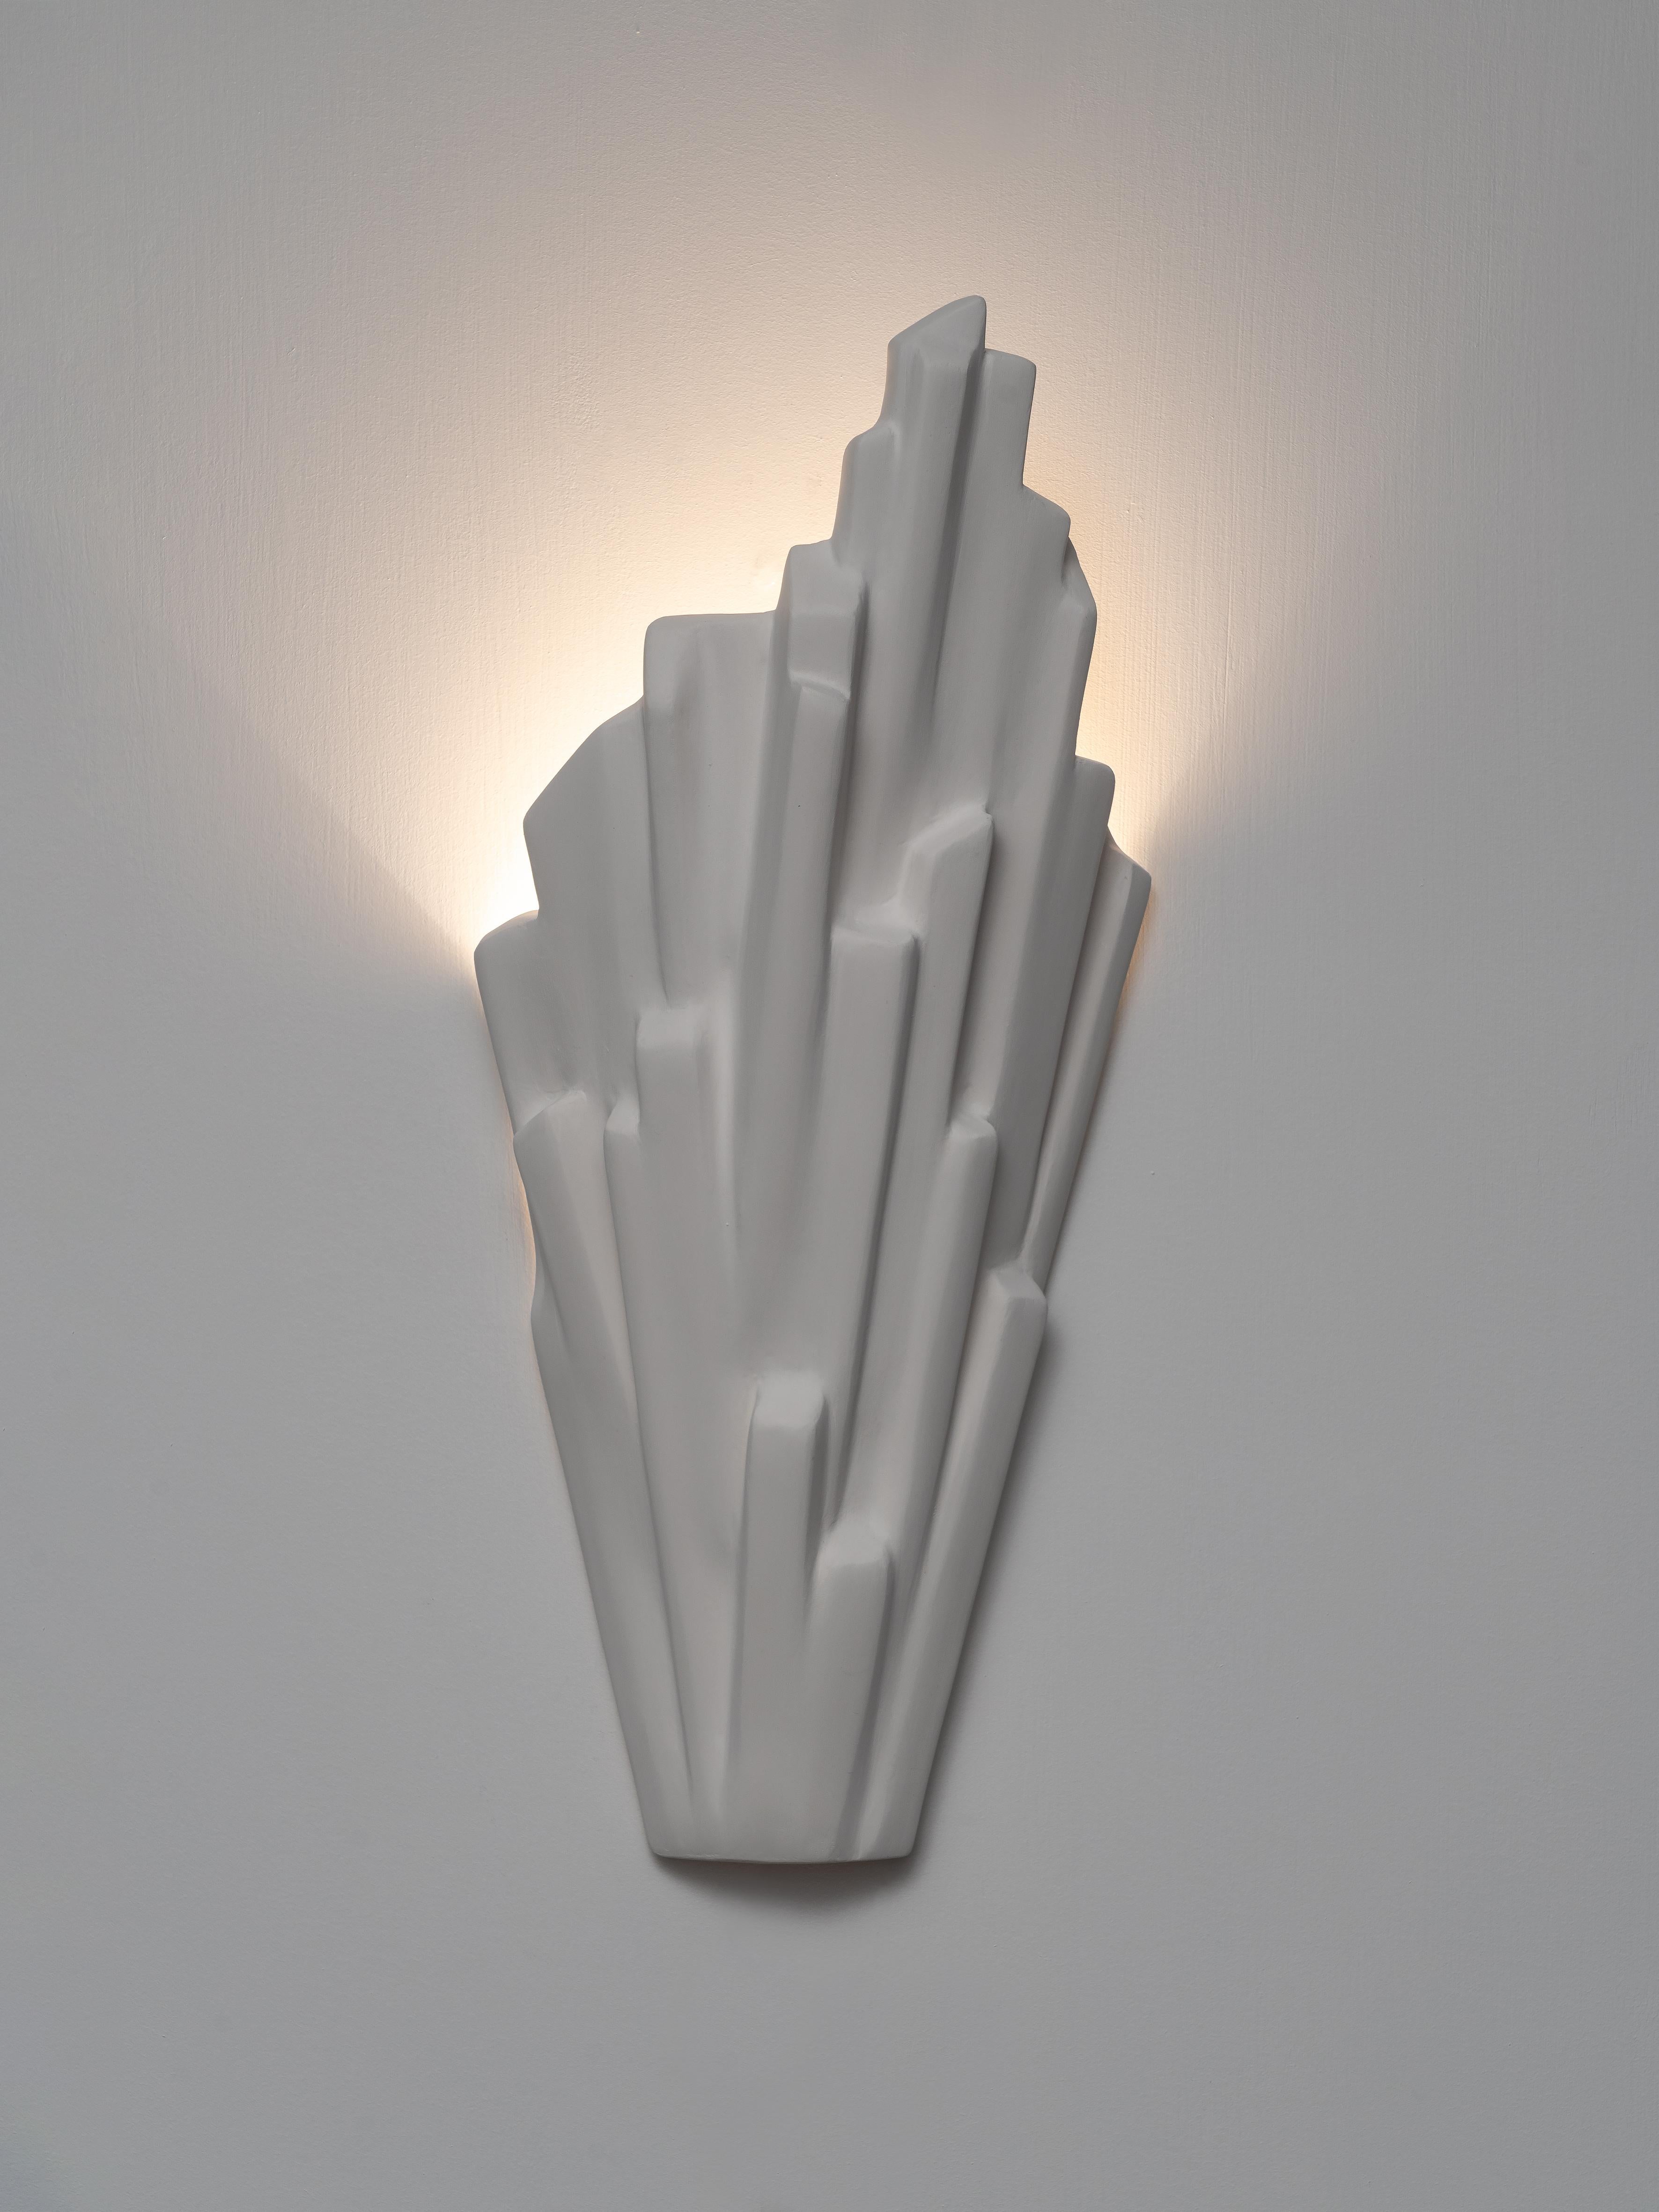 Each Sinan sconce is individually handmade, characterised by its clean, sculptural aesthetic. Hand-sculpted in silky smooth plaster. Also available in Antique Gold Finish or Black Plaster Finish with Antique Gold inside. Alternative finishes